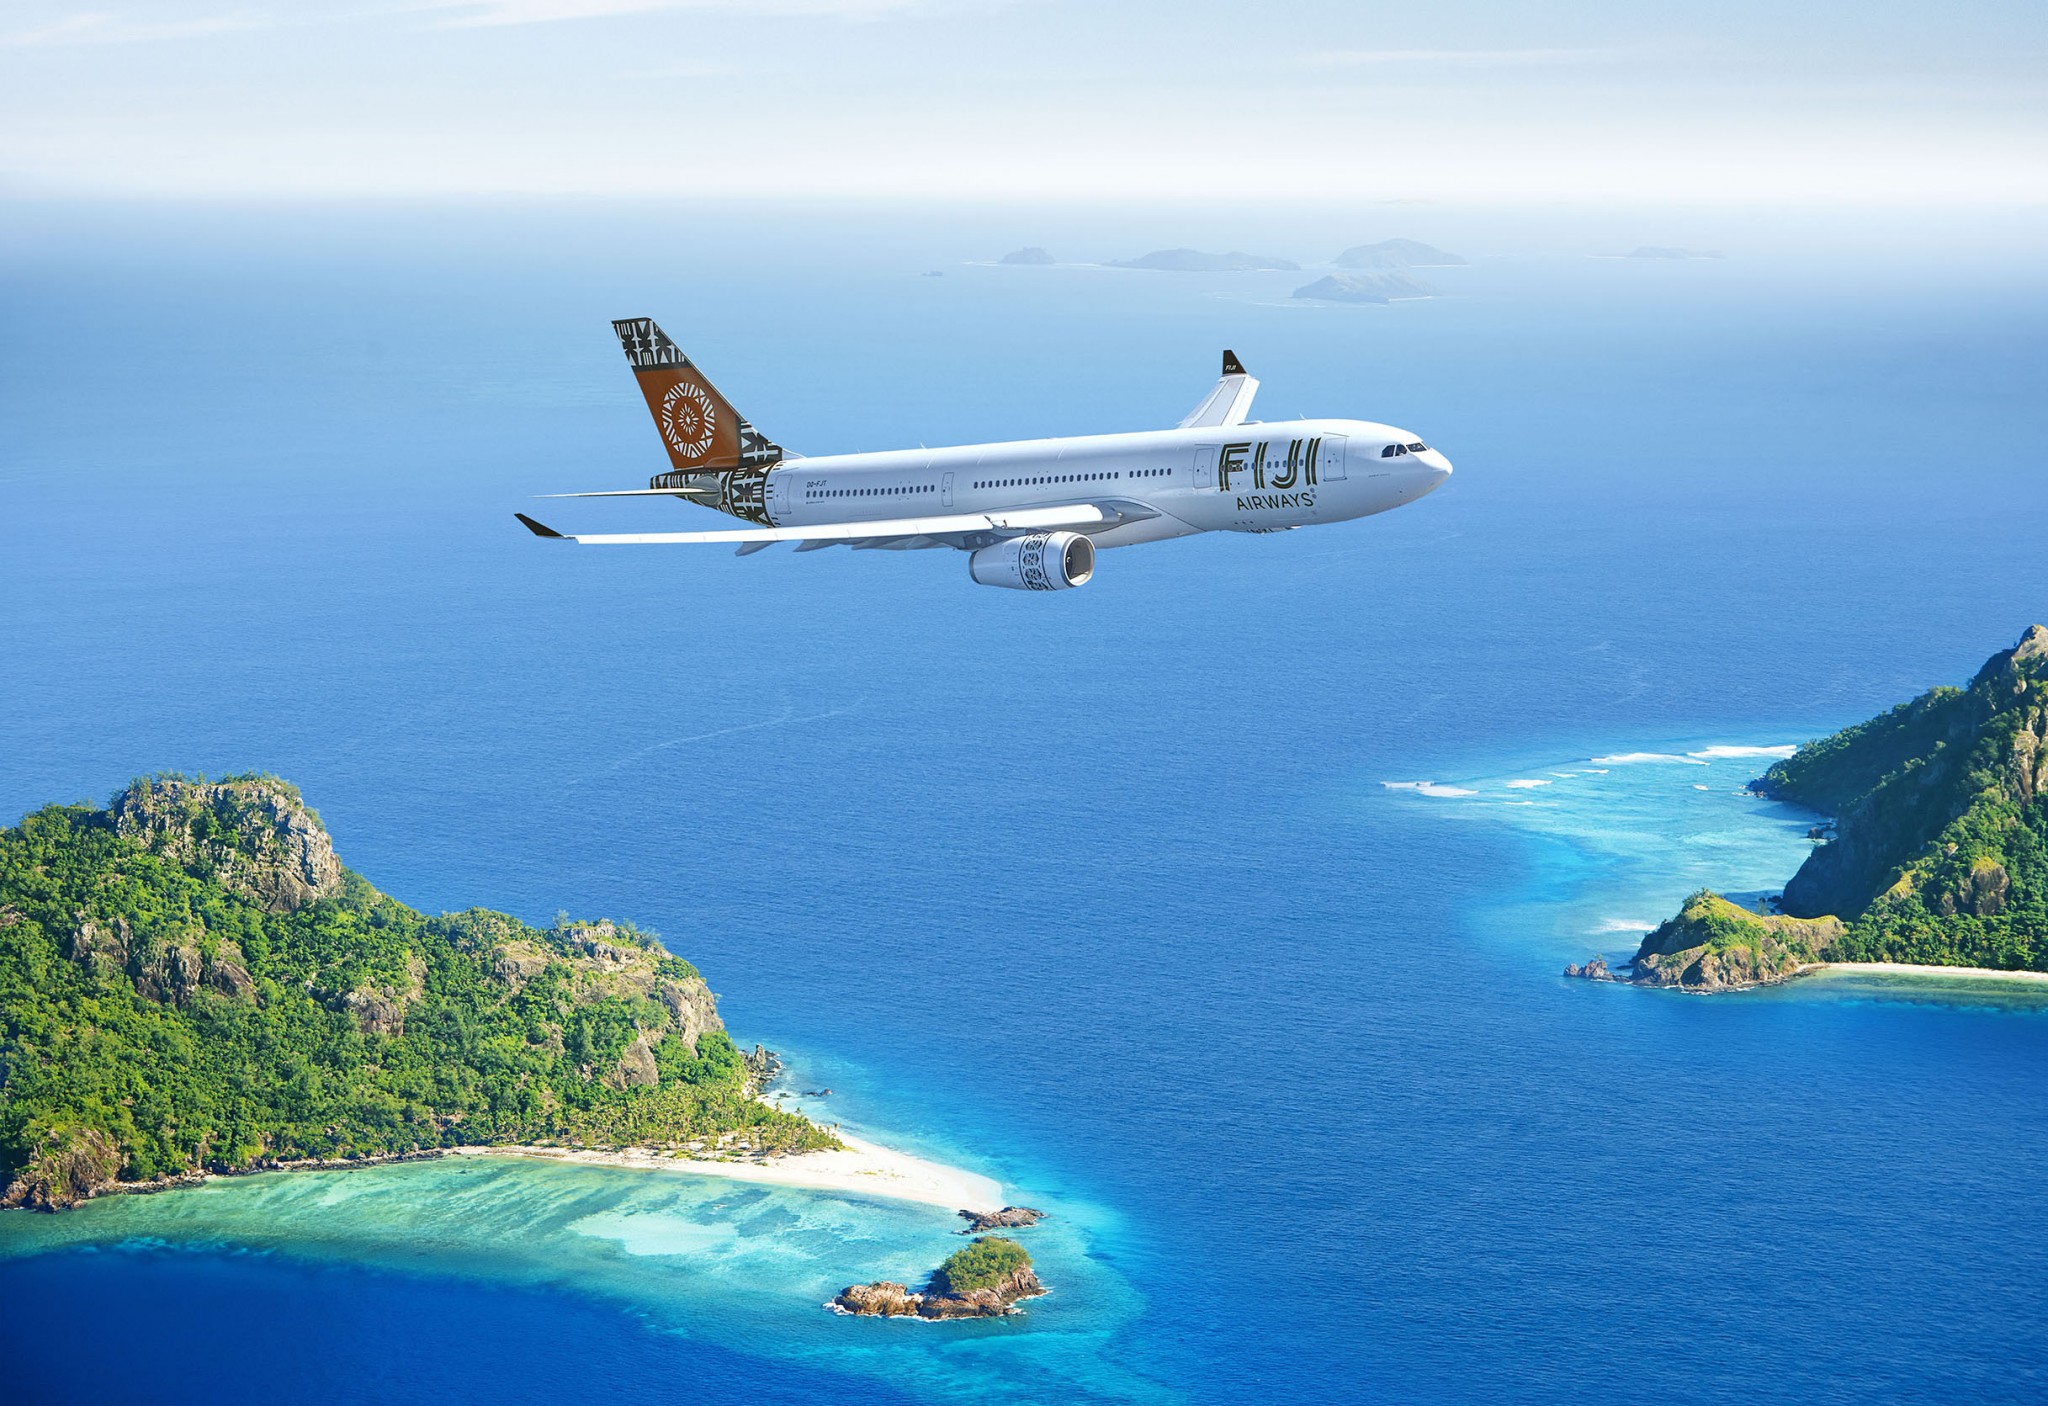 Fiji Airways expect full recovery by year-end as travel rebounds